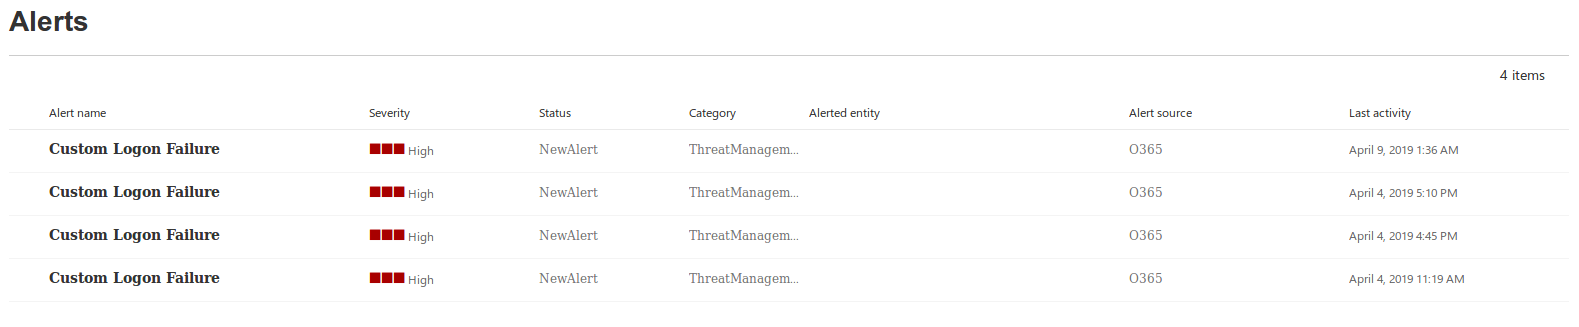 Alerts detected through the O365 dashboard